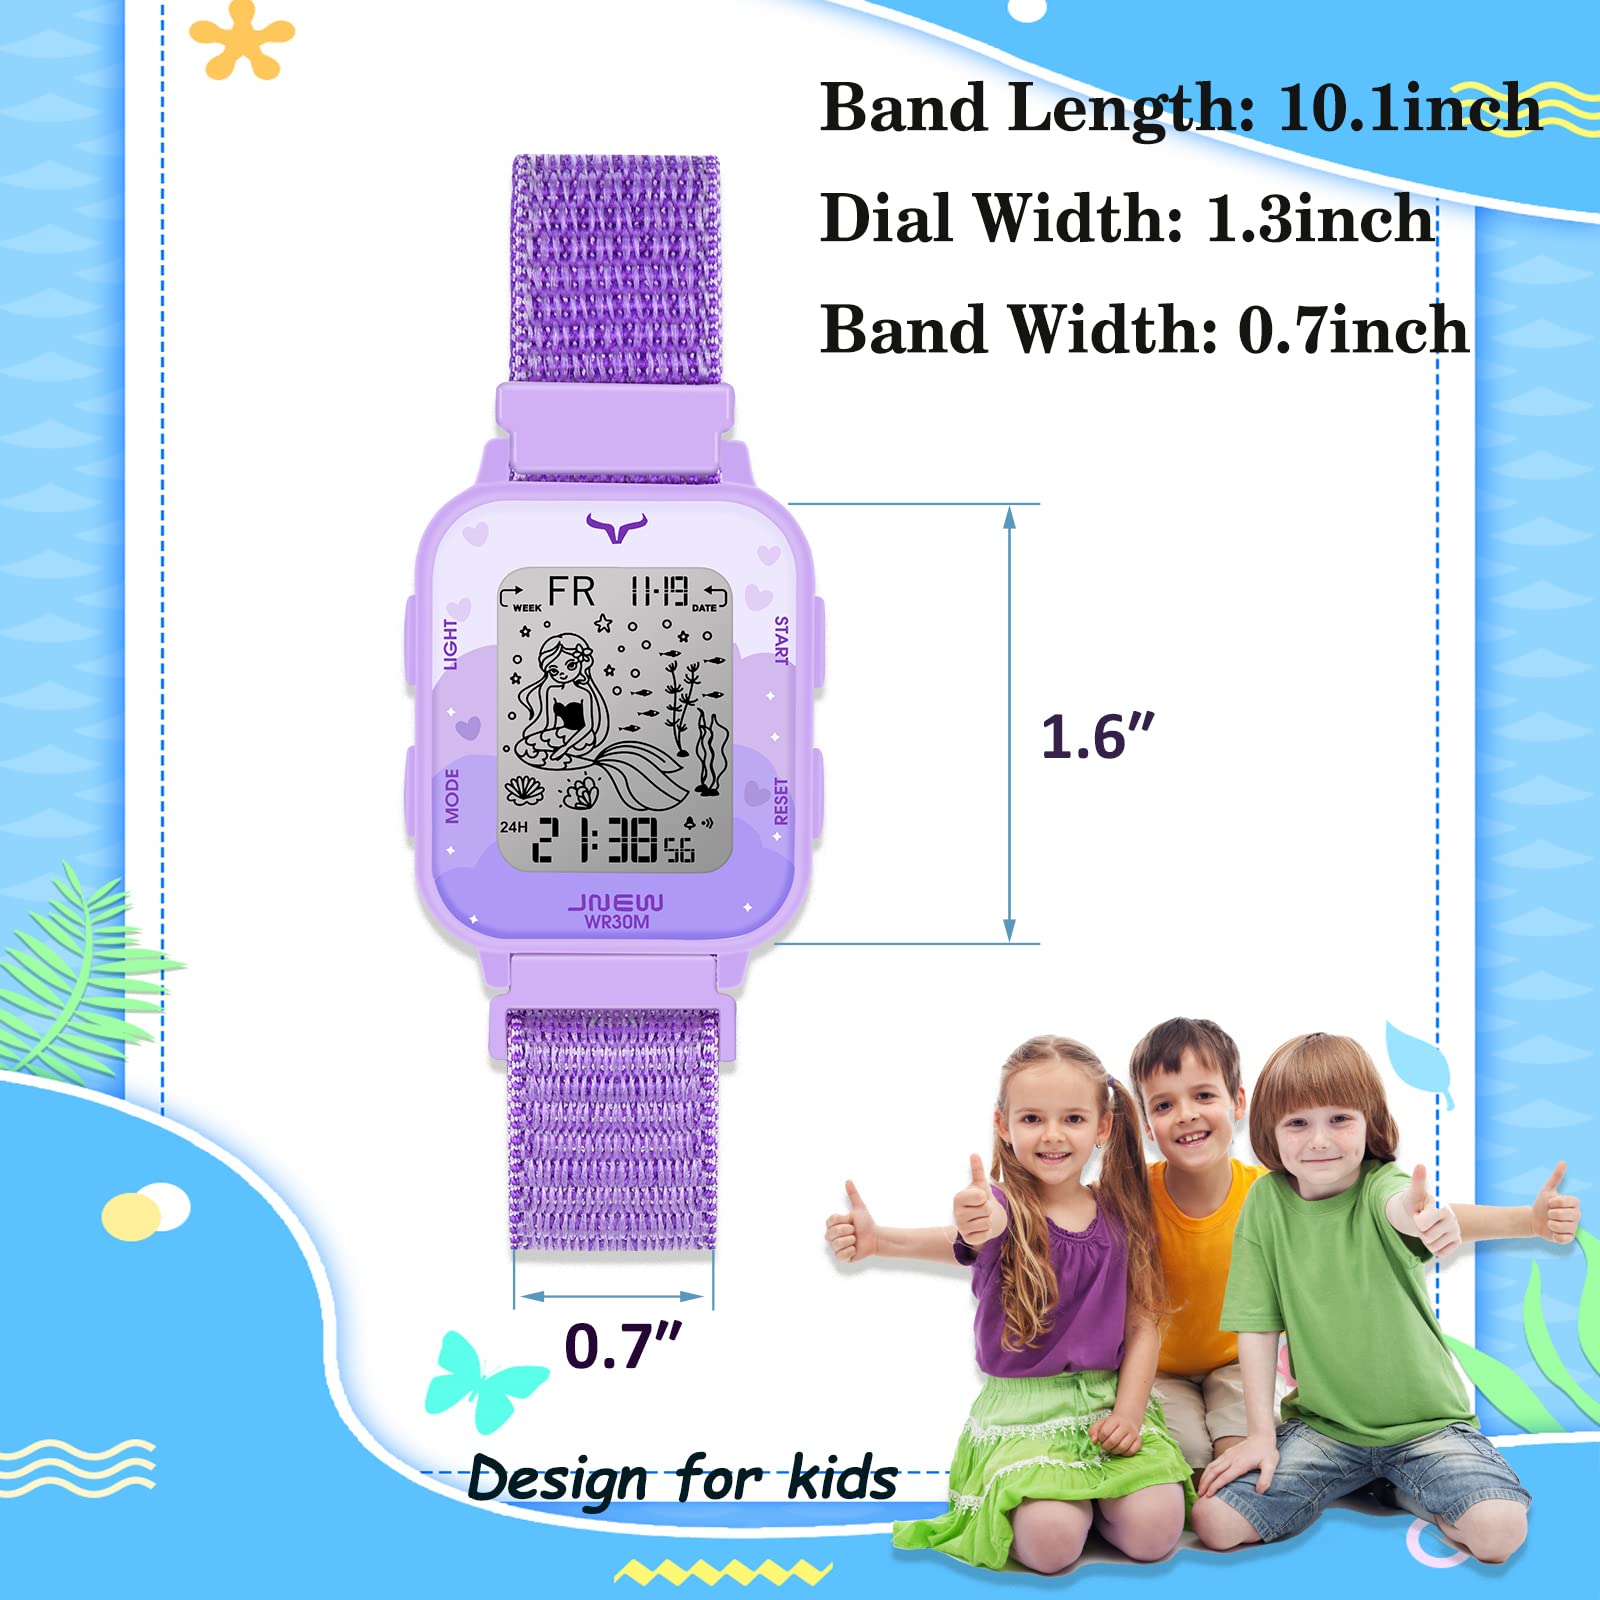 Venhoo Kids Watch for Girls Outdoor Sport Woven Nylon Strap 7 Colorful LED Electrical Wrist Watches with Alarm Luminous Stopwatch for Little Girls Child-Purple Mermaid